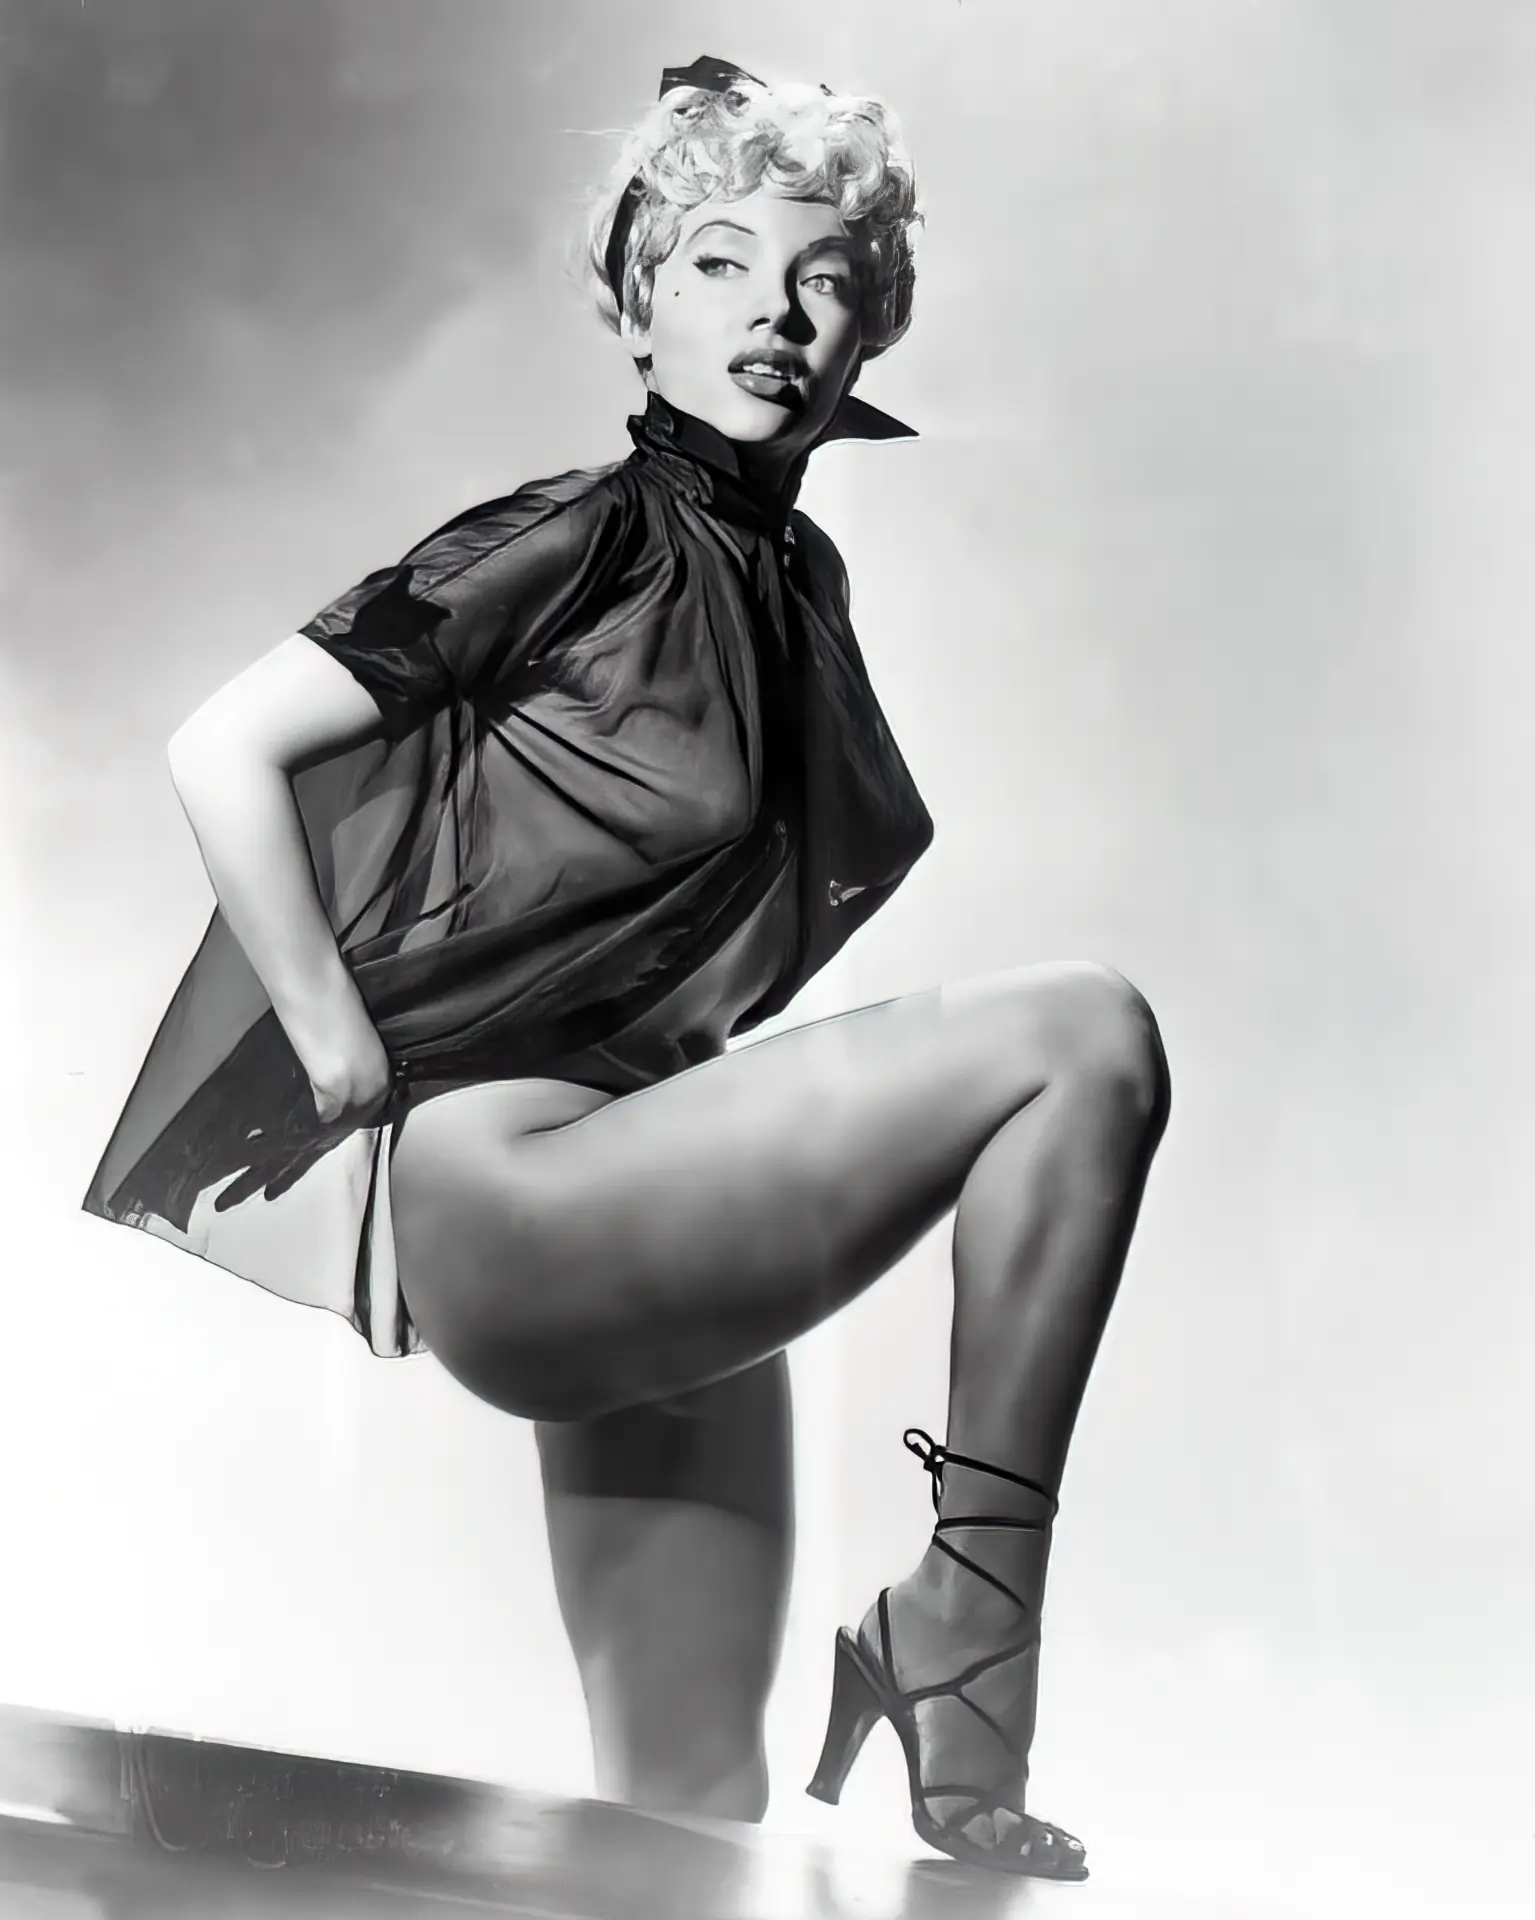 Lili St. Cyr poses in a silky blouse and heels